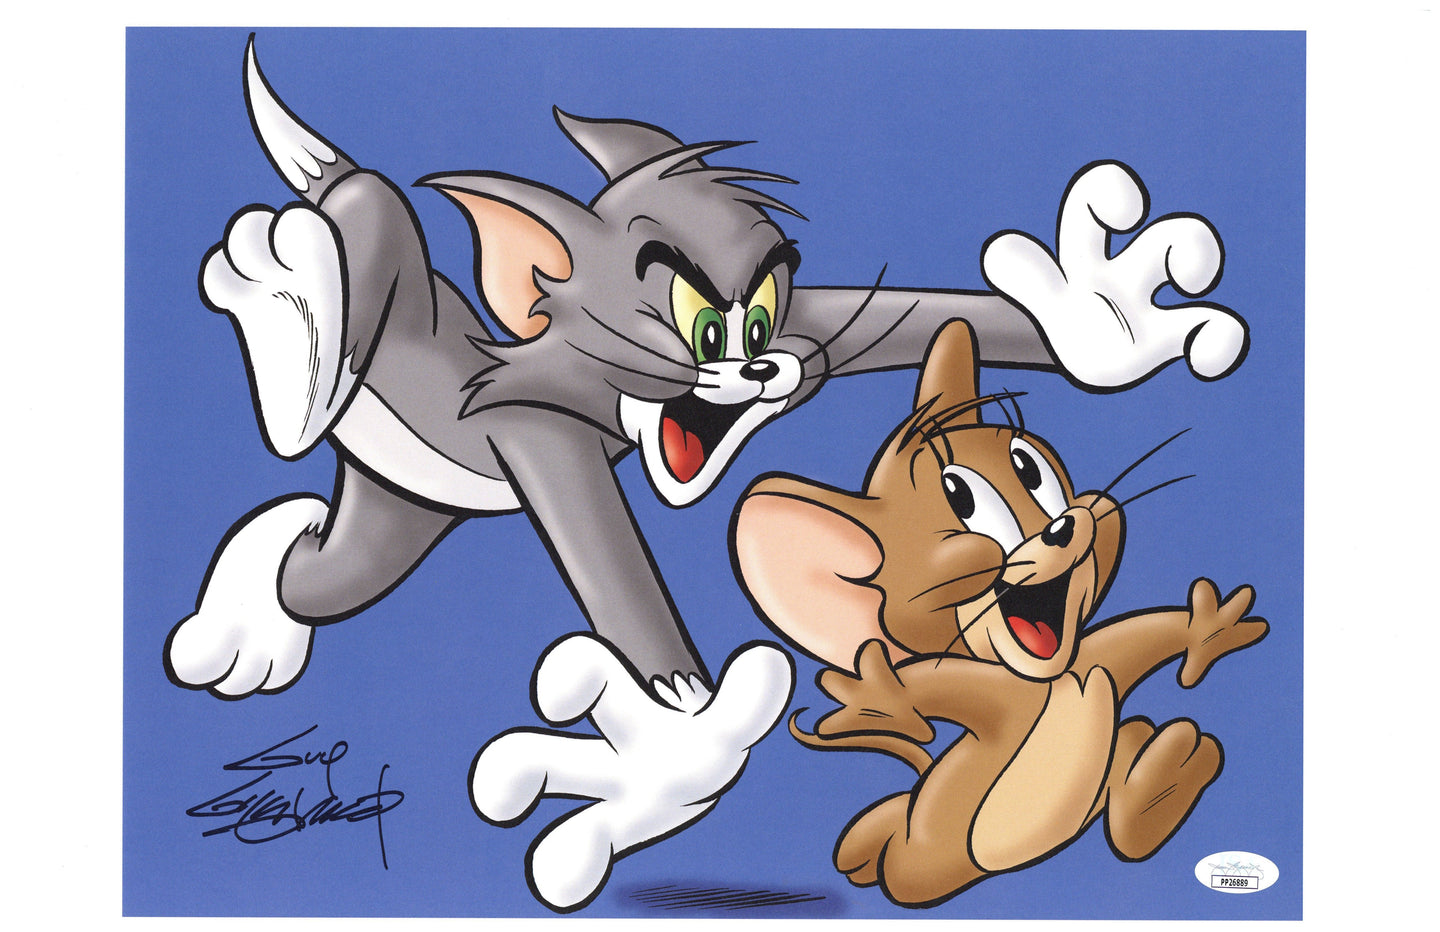 Tom & Jerry 11x17 Art Print - Created by & Signed by Guy Gilchrist - Includes JSA COA